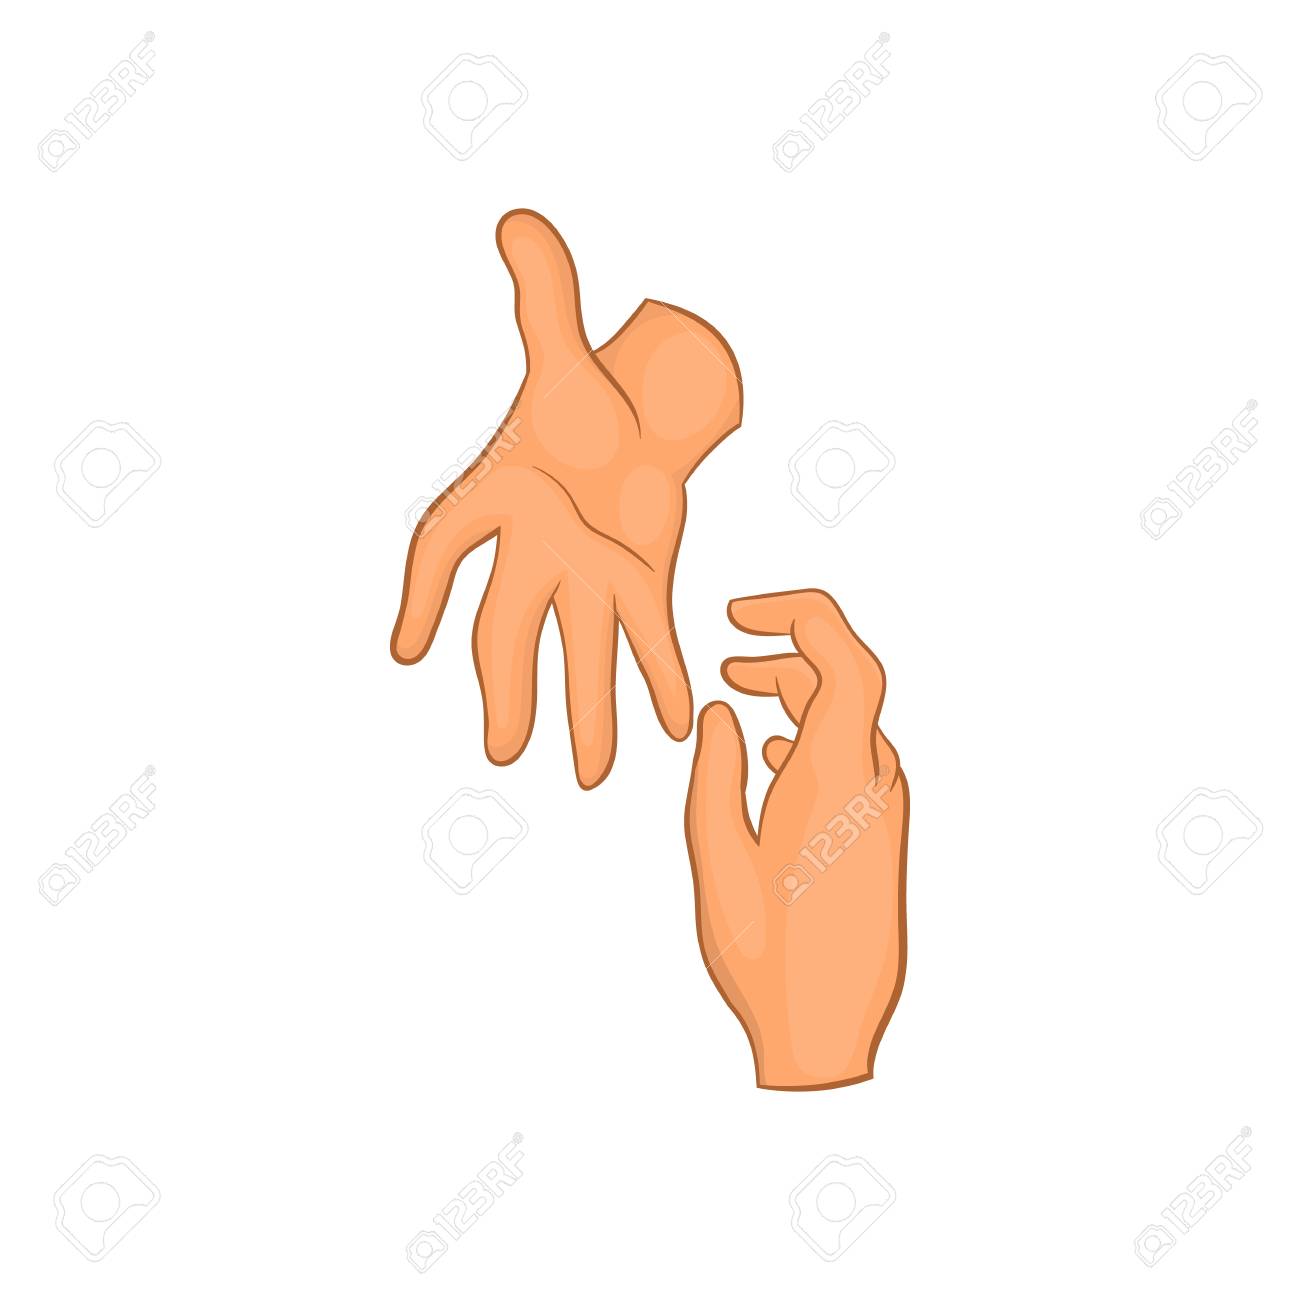 Helping Hand Icon In Cartoon Style Isolated On White Background